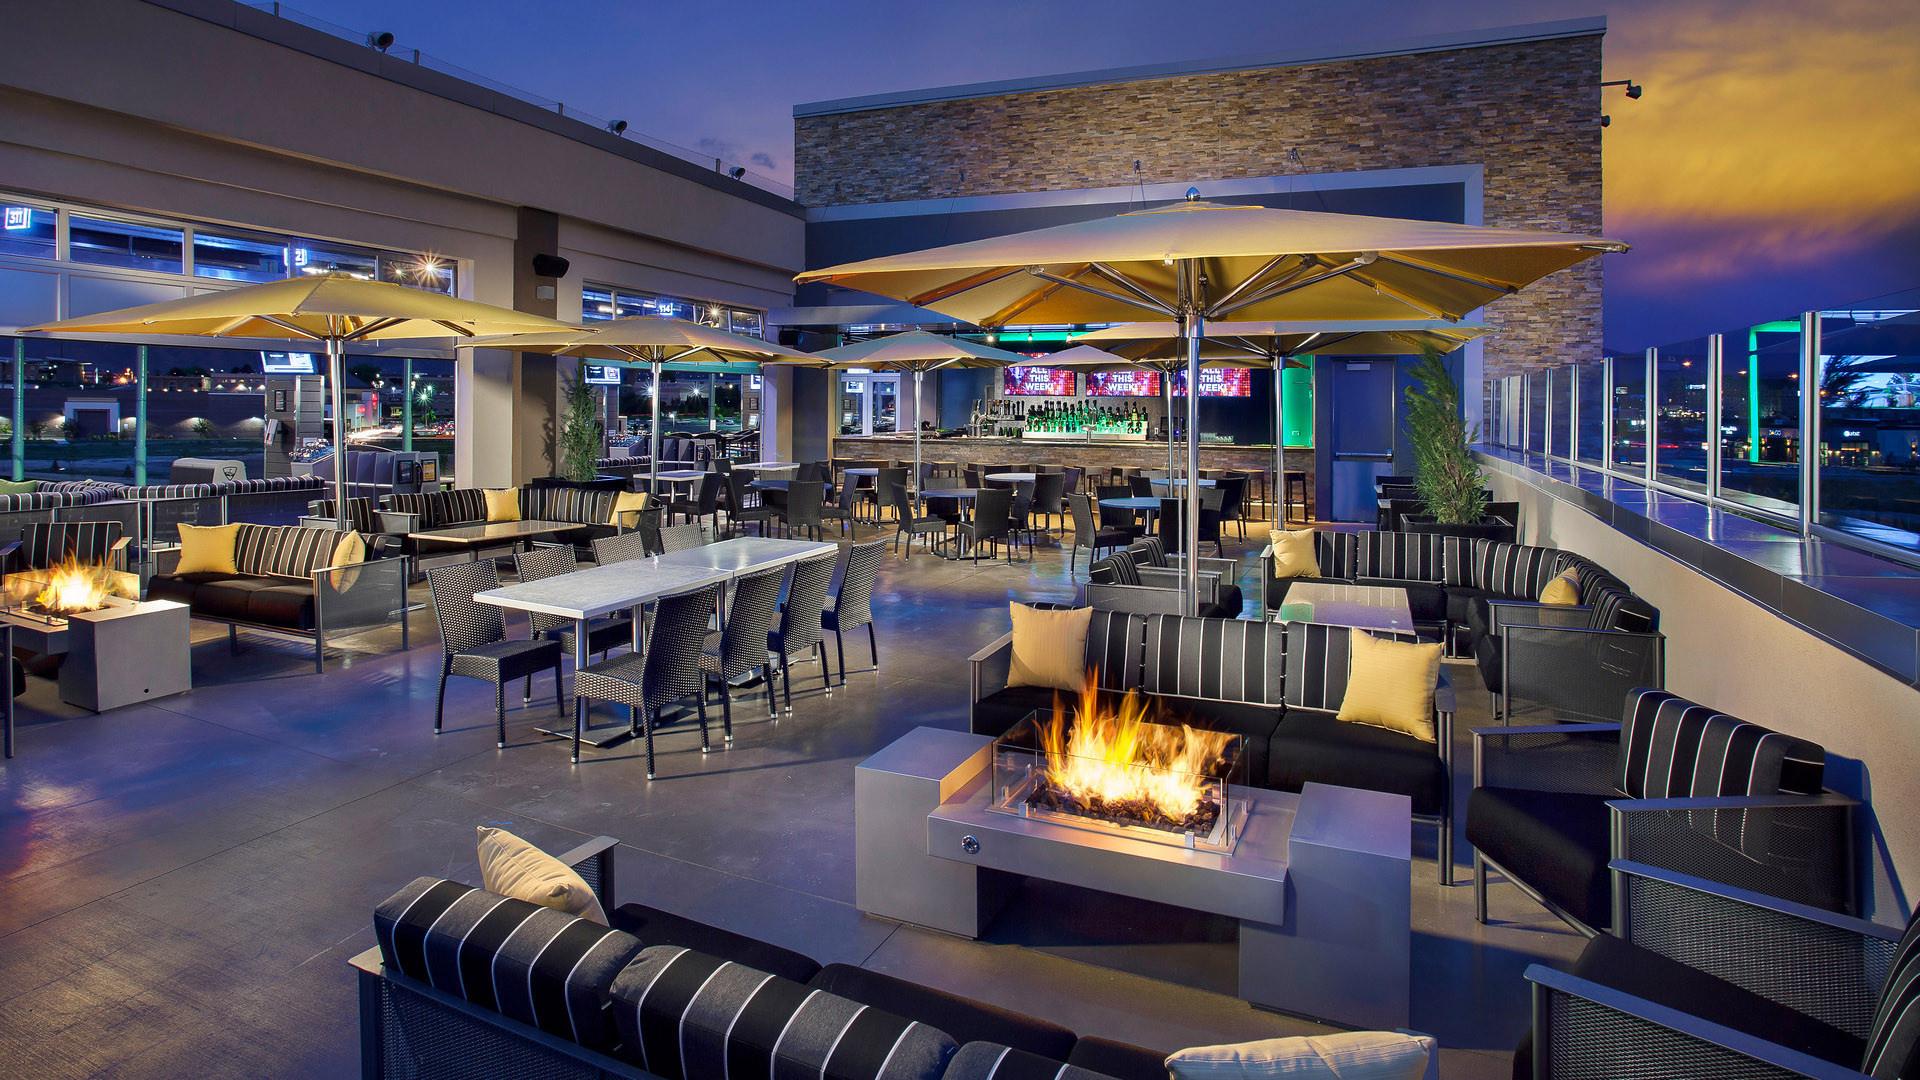 Rooftop terrace with fire pits